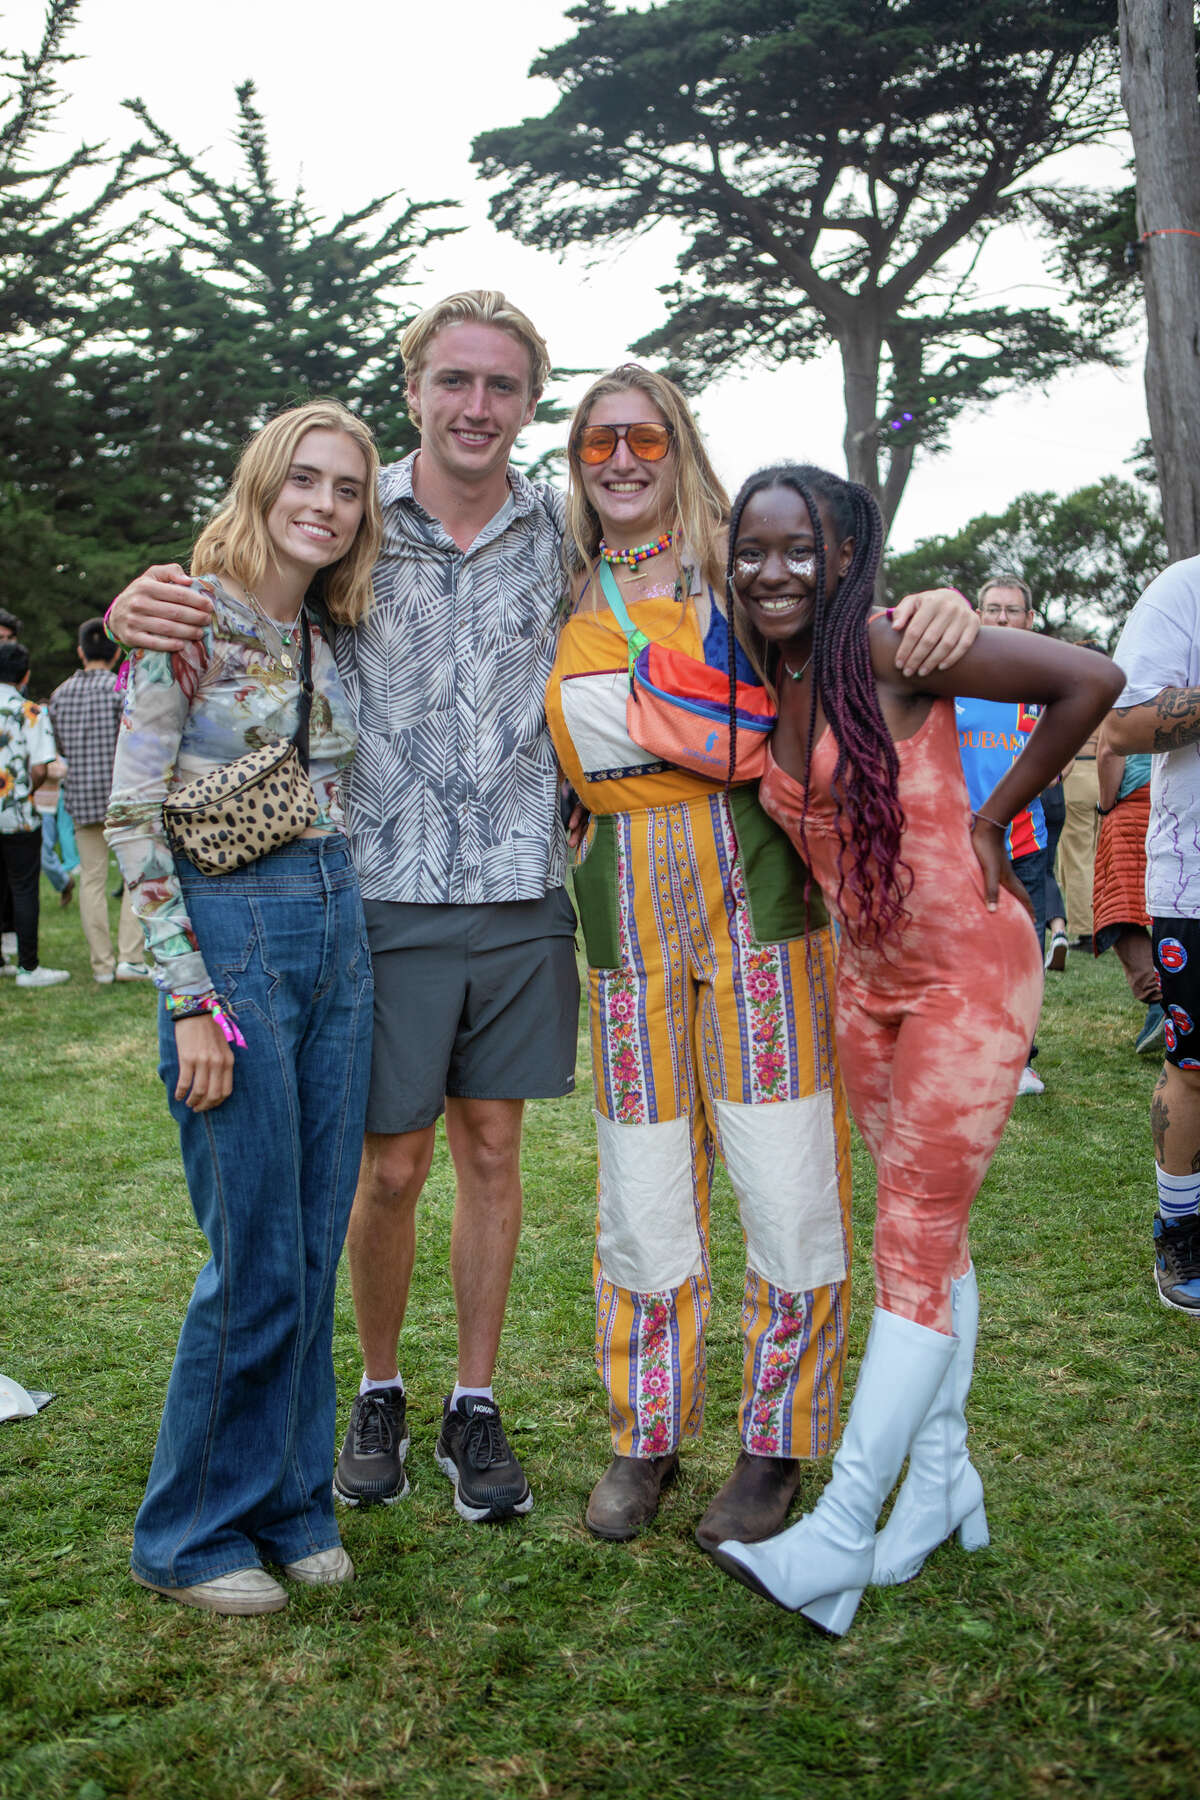 (Left to right) Anna McNulty, Jackson Purell, Ira Nates and Jalen Sovers at Outside Lands in Golden Gate Park, San Francisco, CA on August 5, 2022.